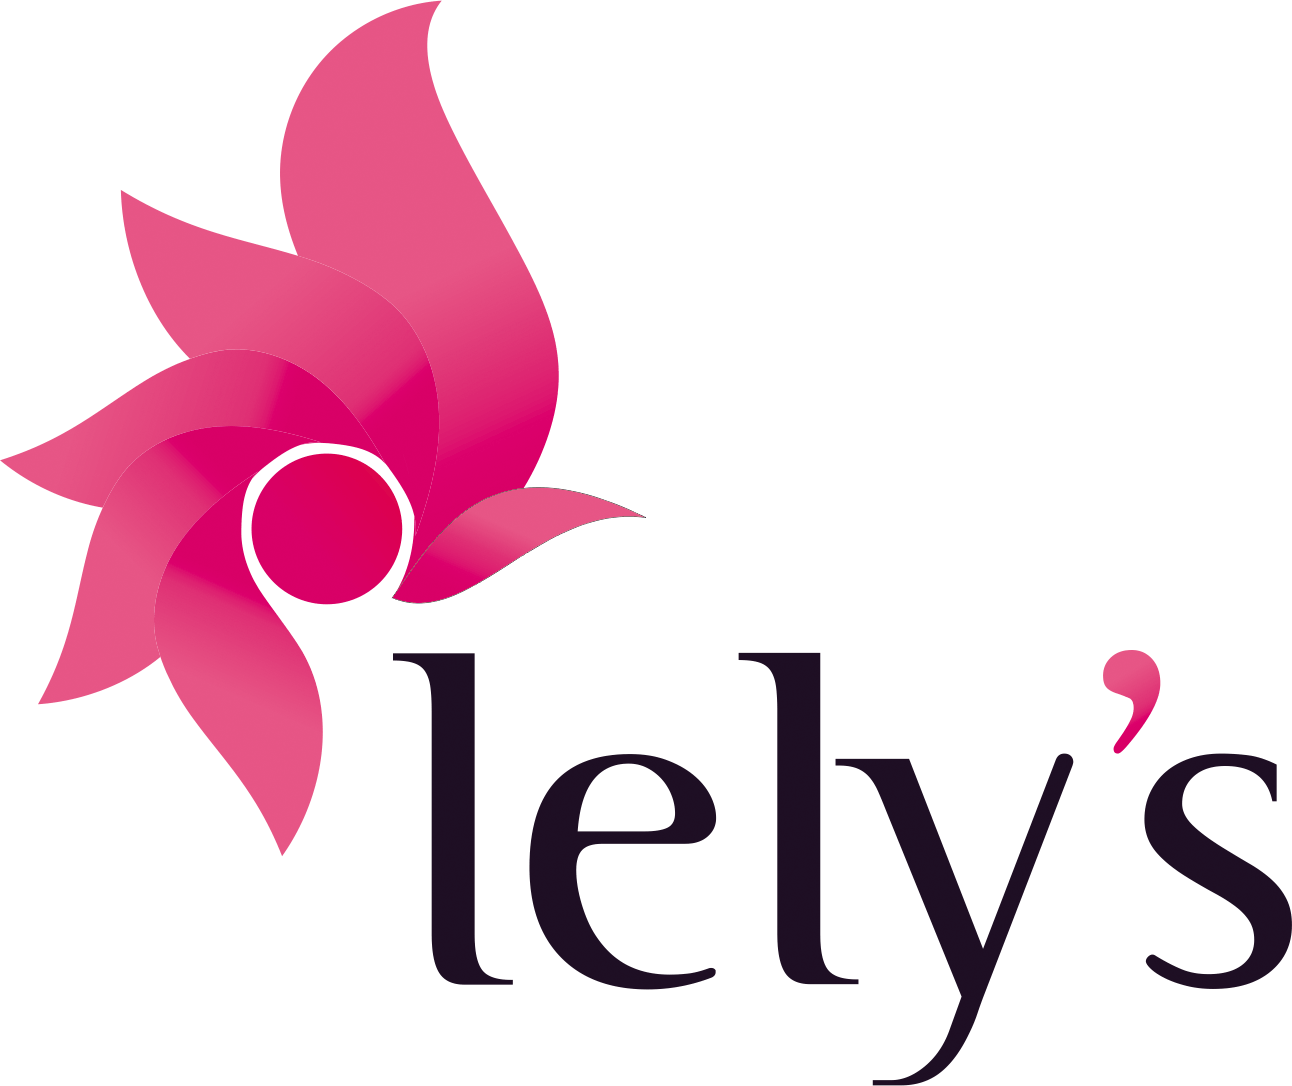 Lely Logo - Terms & Conditions